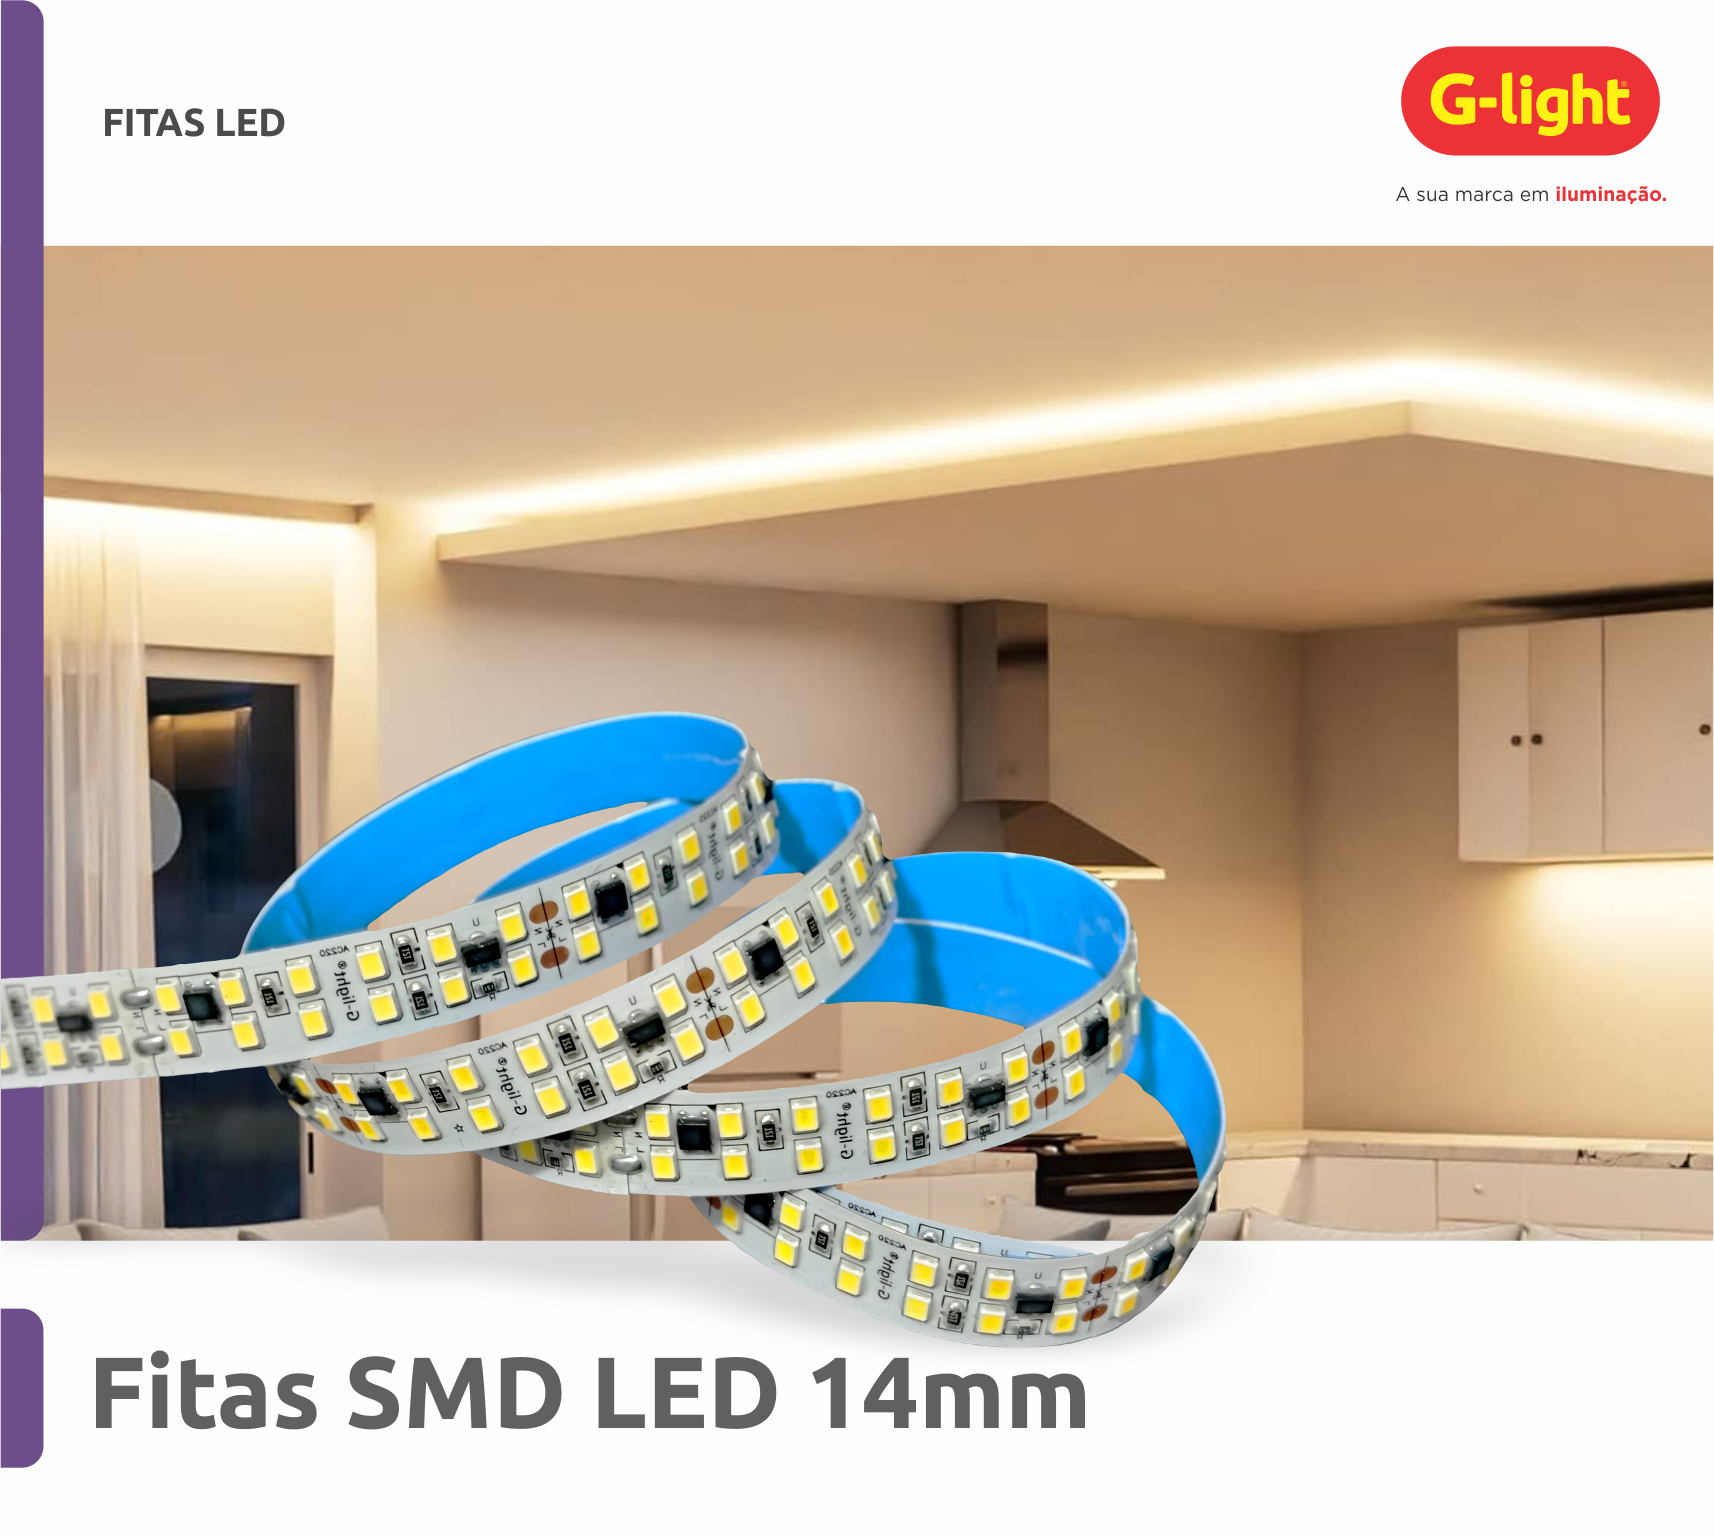 Fitas SMD LED 14mm